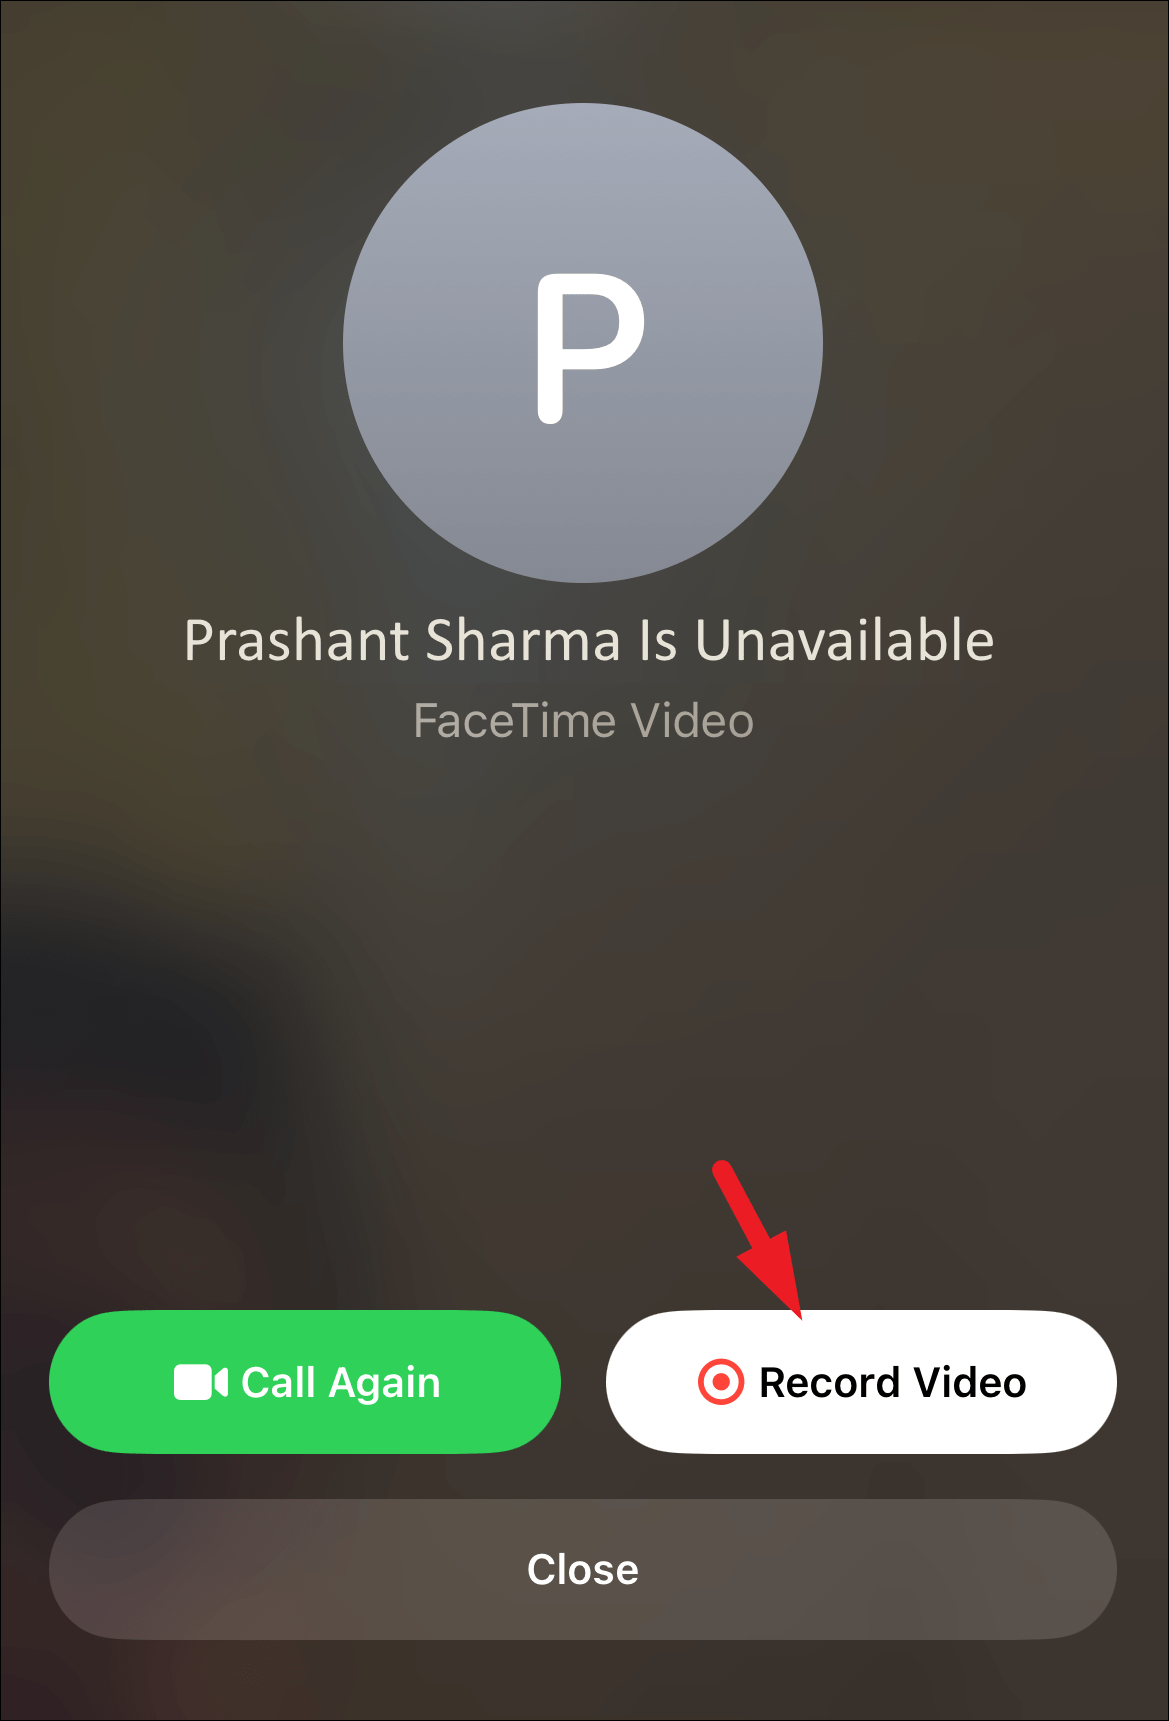 they don't answer, you will see options to either 'Call again' or 'Record Audio Video